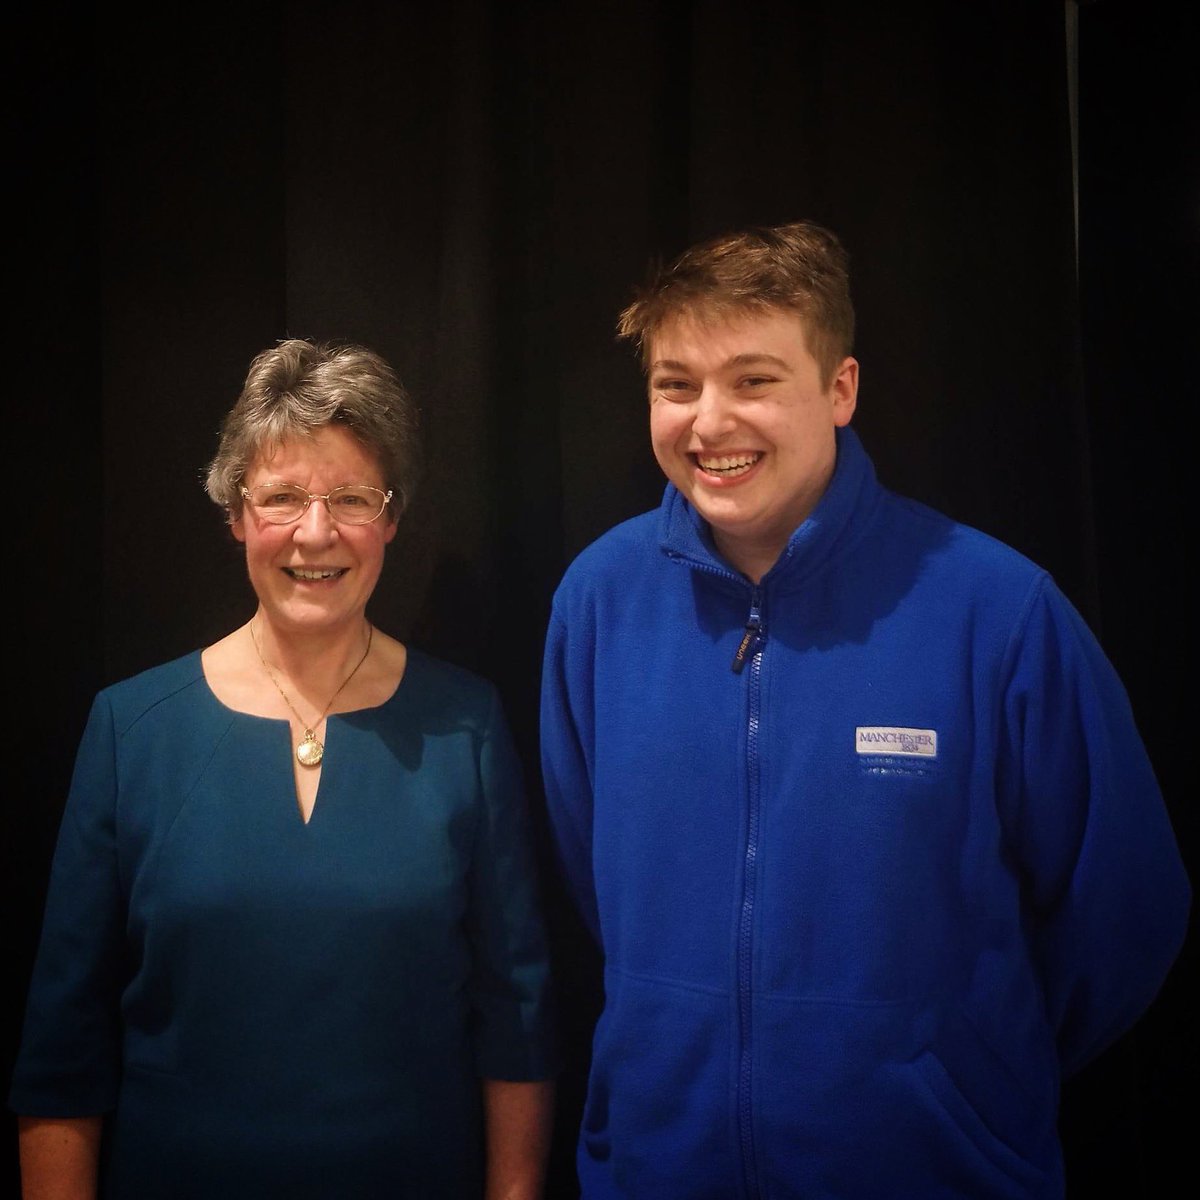 And here’s a photo of when I was lucky enough to meet the person that discovered them, Dame Jocelyn Bell-Burnell. She’s a joy and an absolute legend.